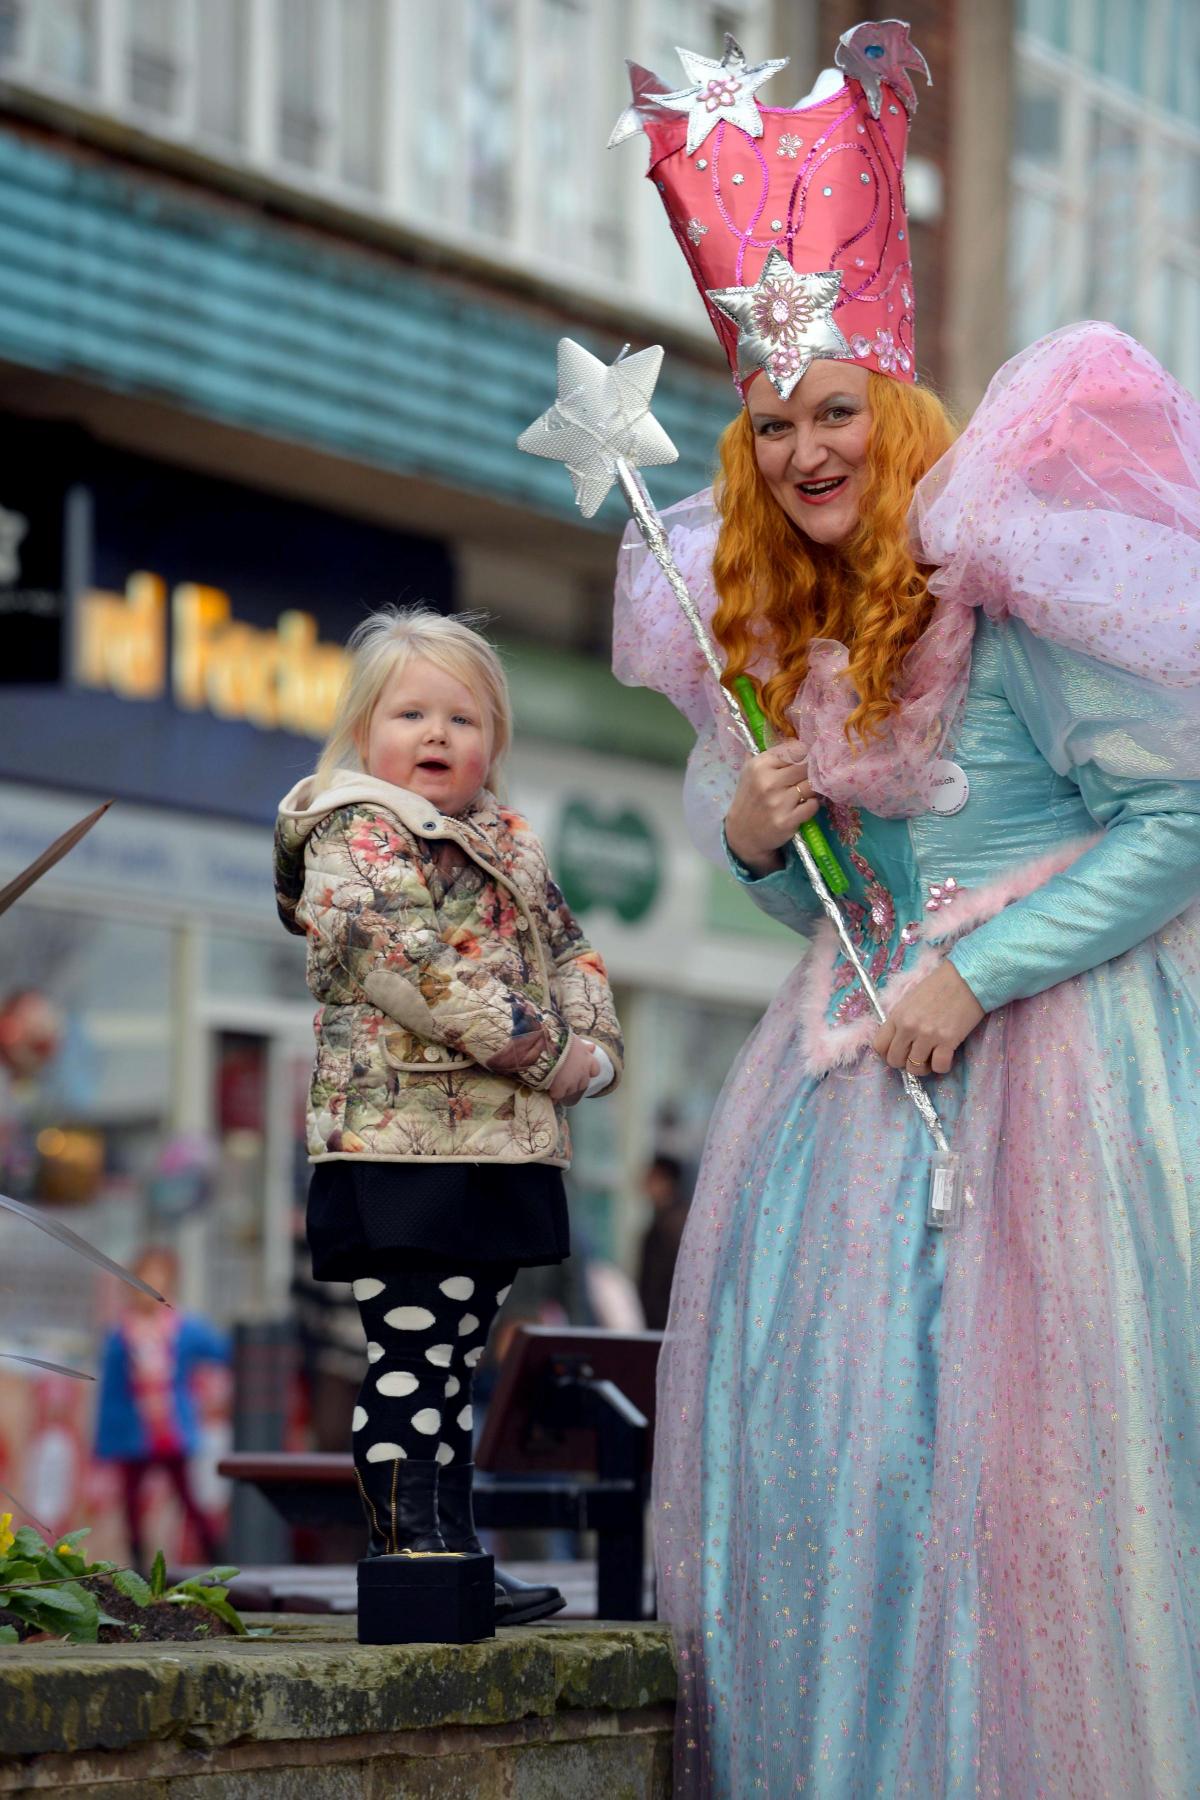 Bryann Capstick, three, with Glinda, the Good Witch of the North